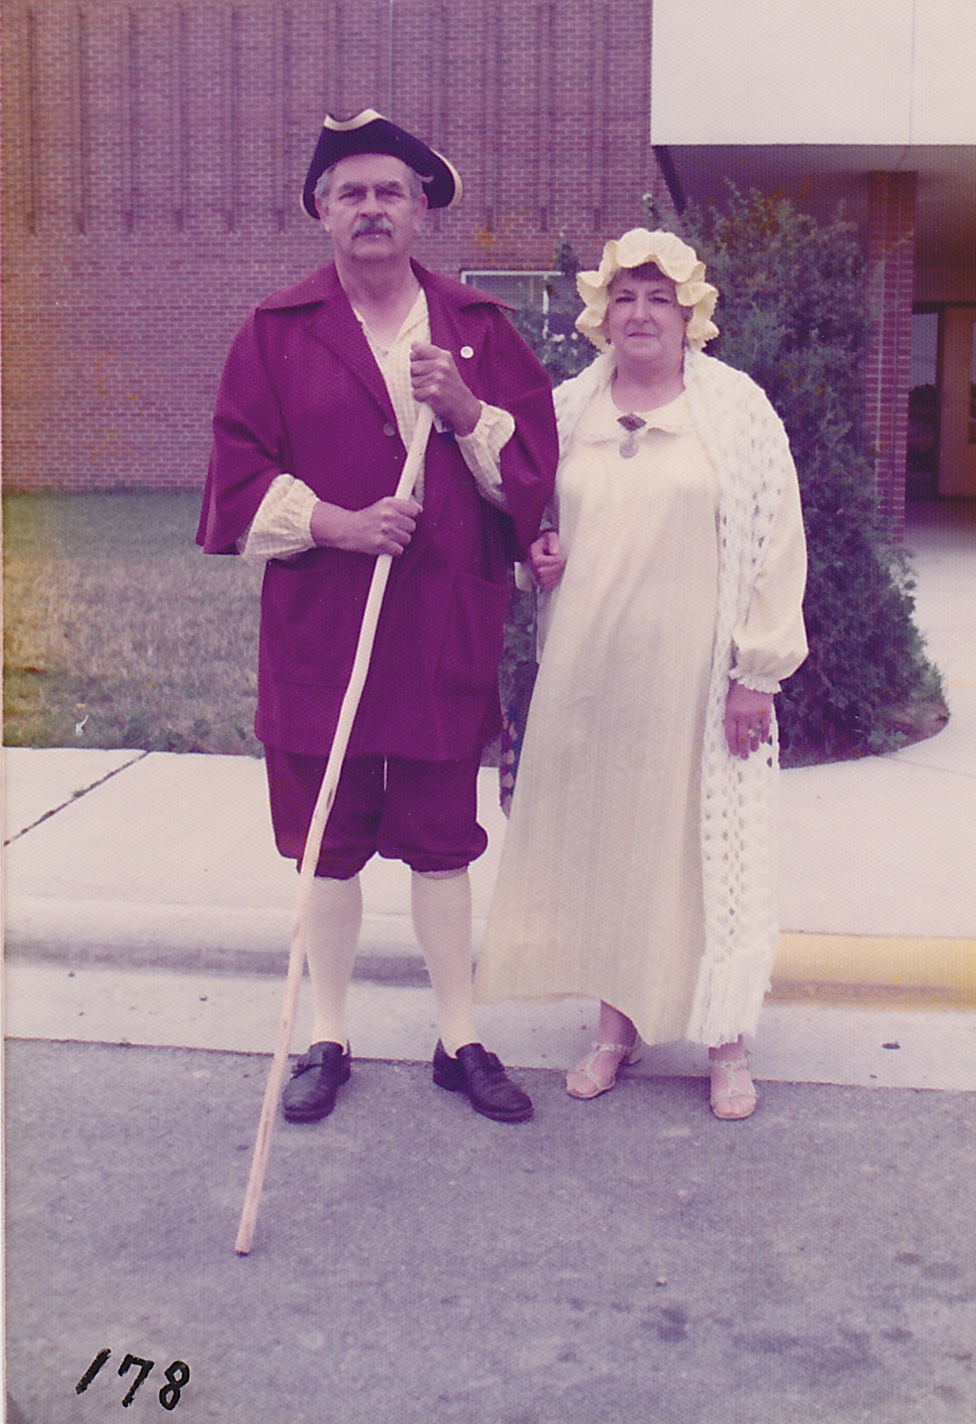 Doyle and Mary Bell in Bicentennial costumes, July 1976.